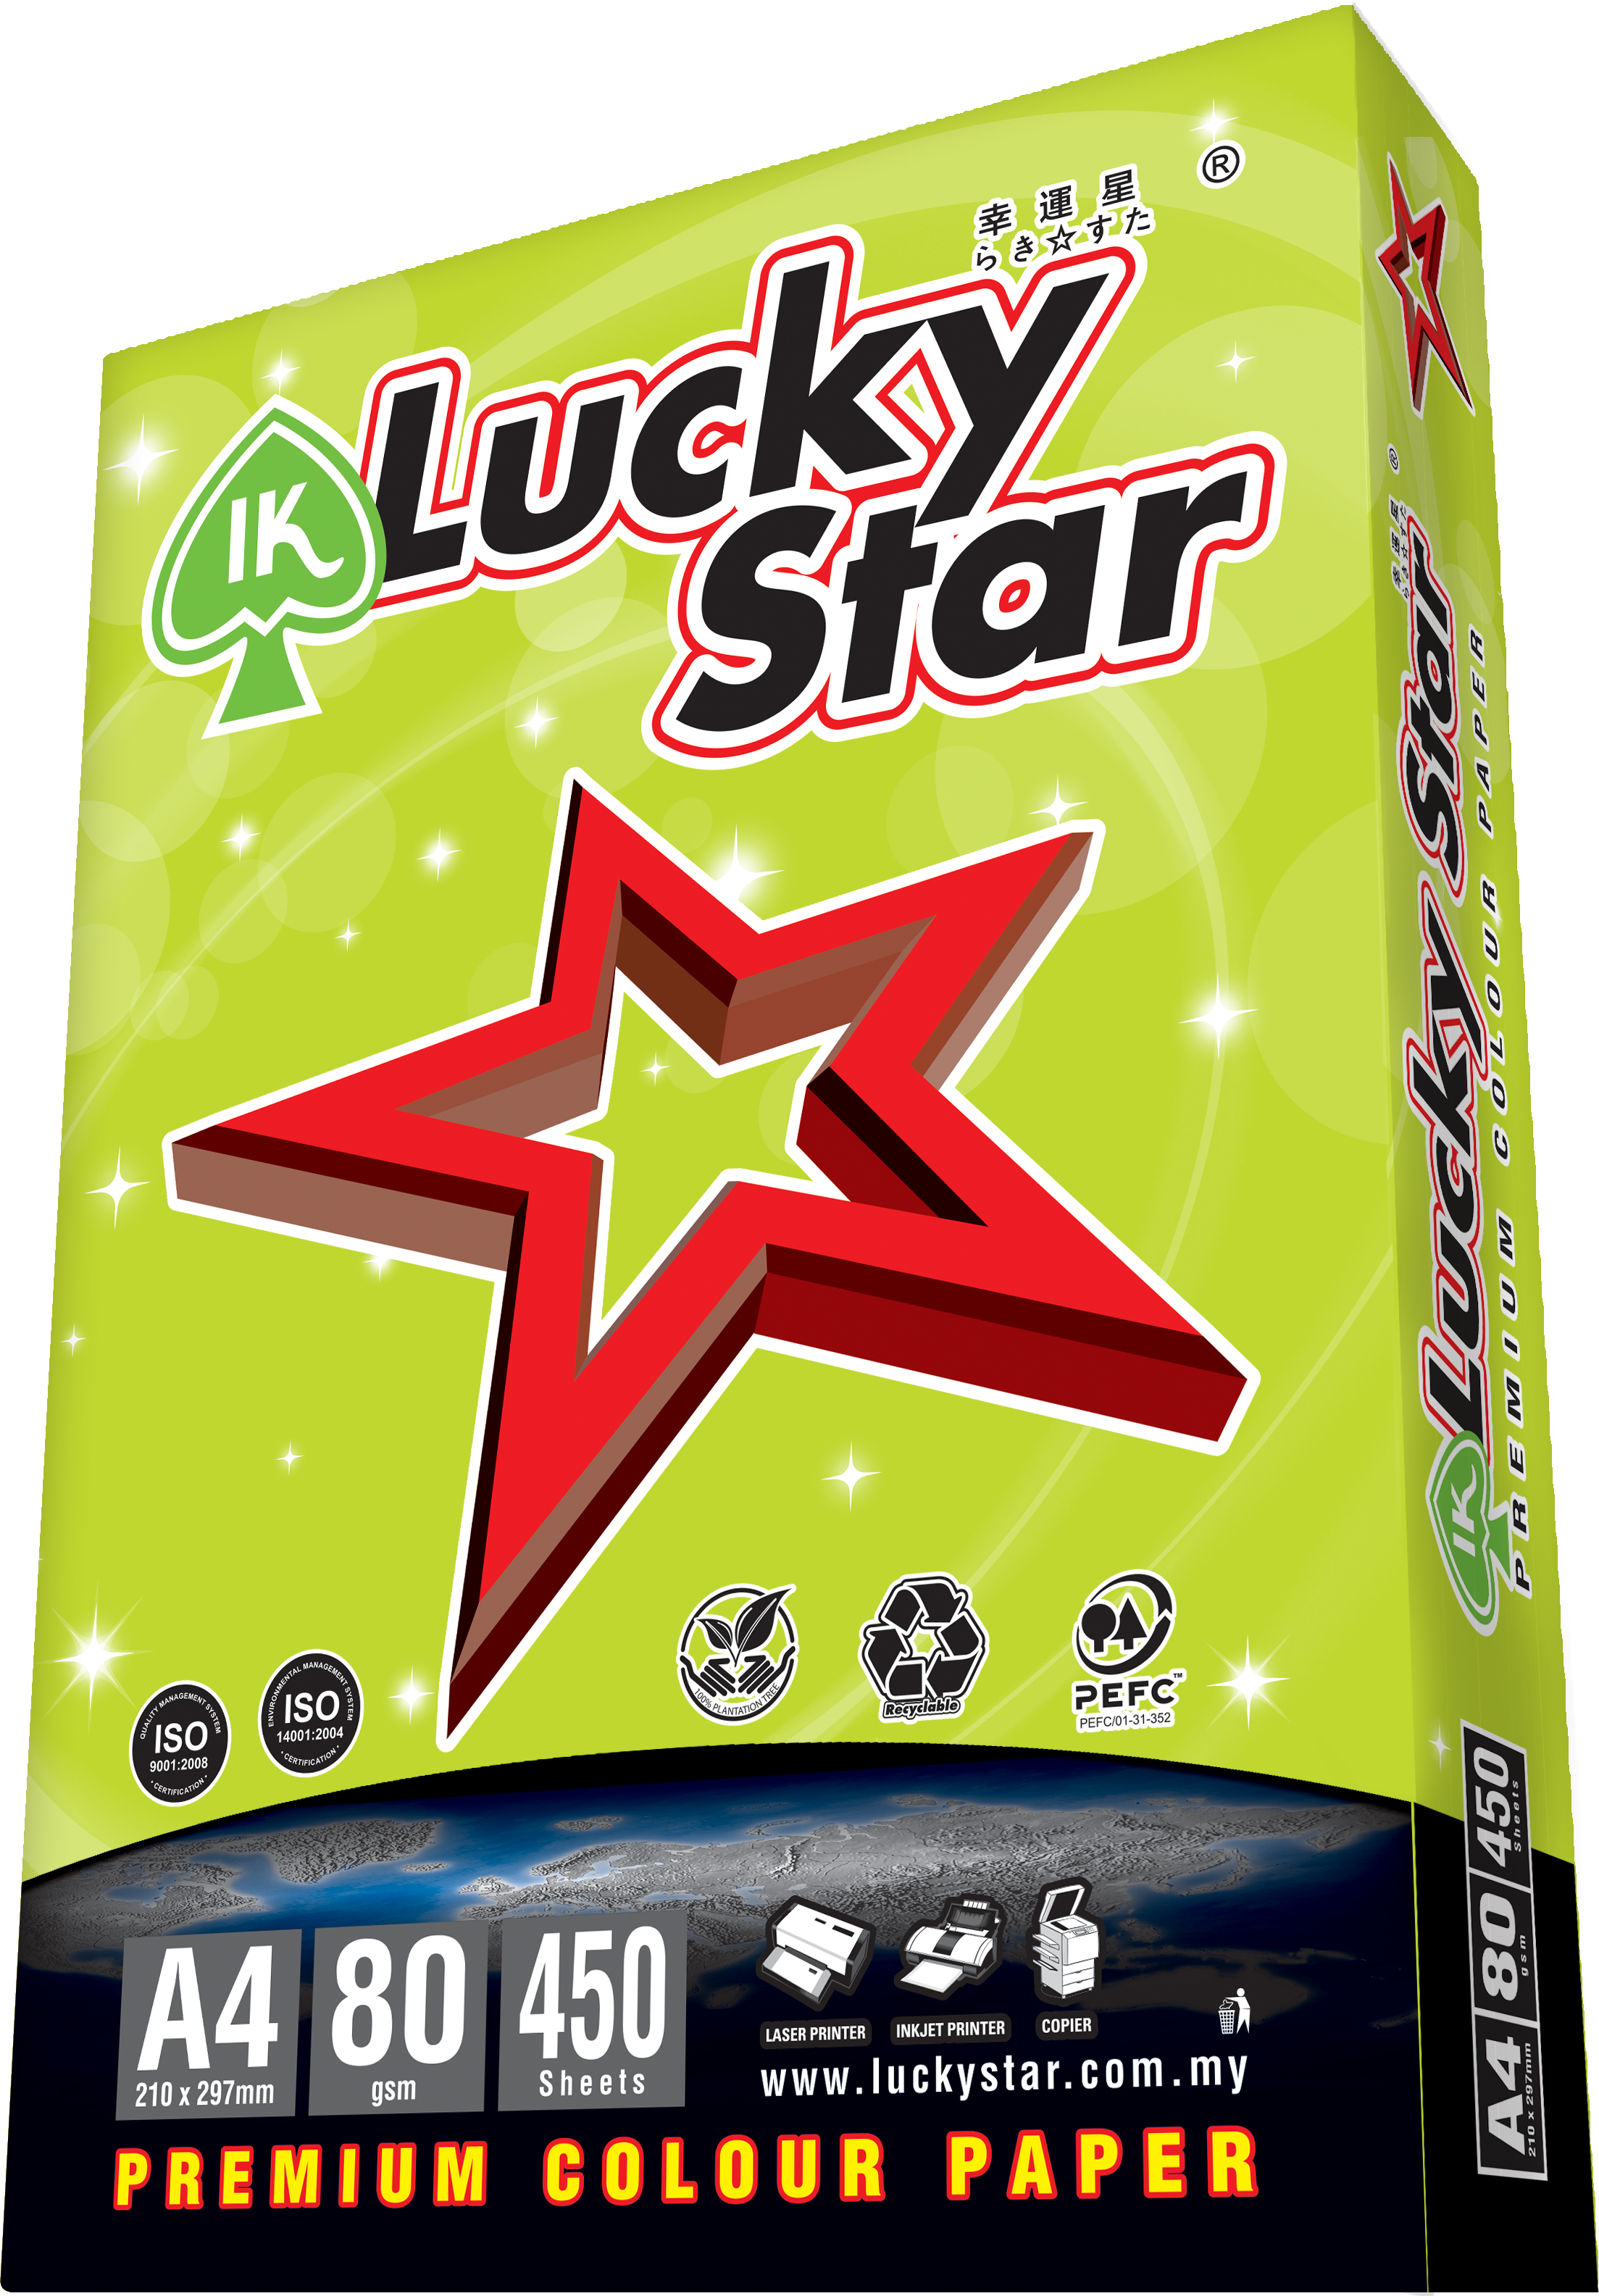 A4 LUCKY STAR COLOR PAPER CYBER